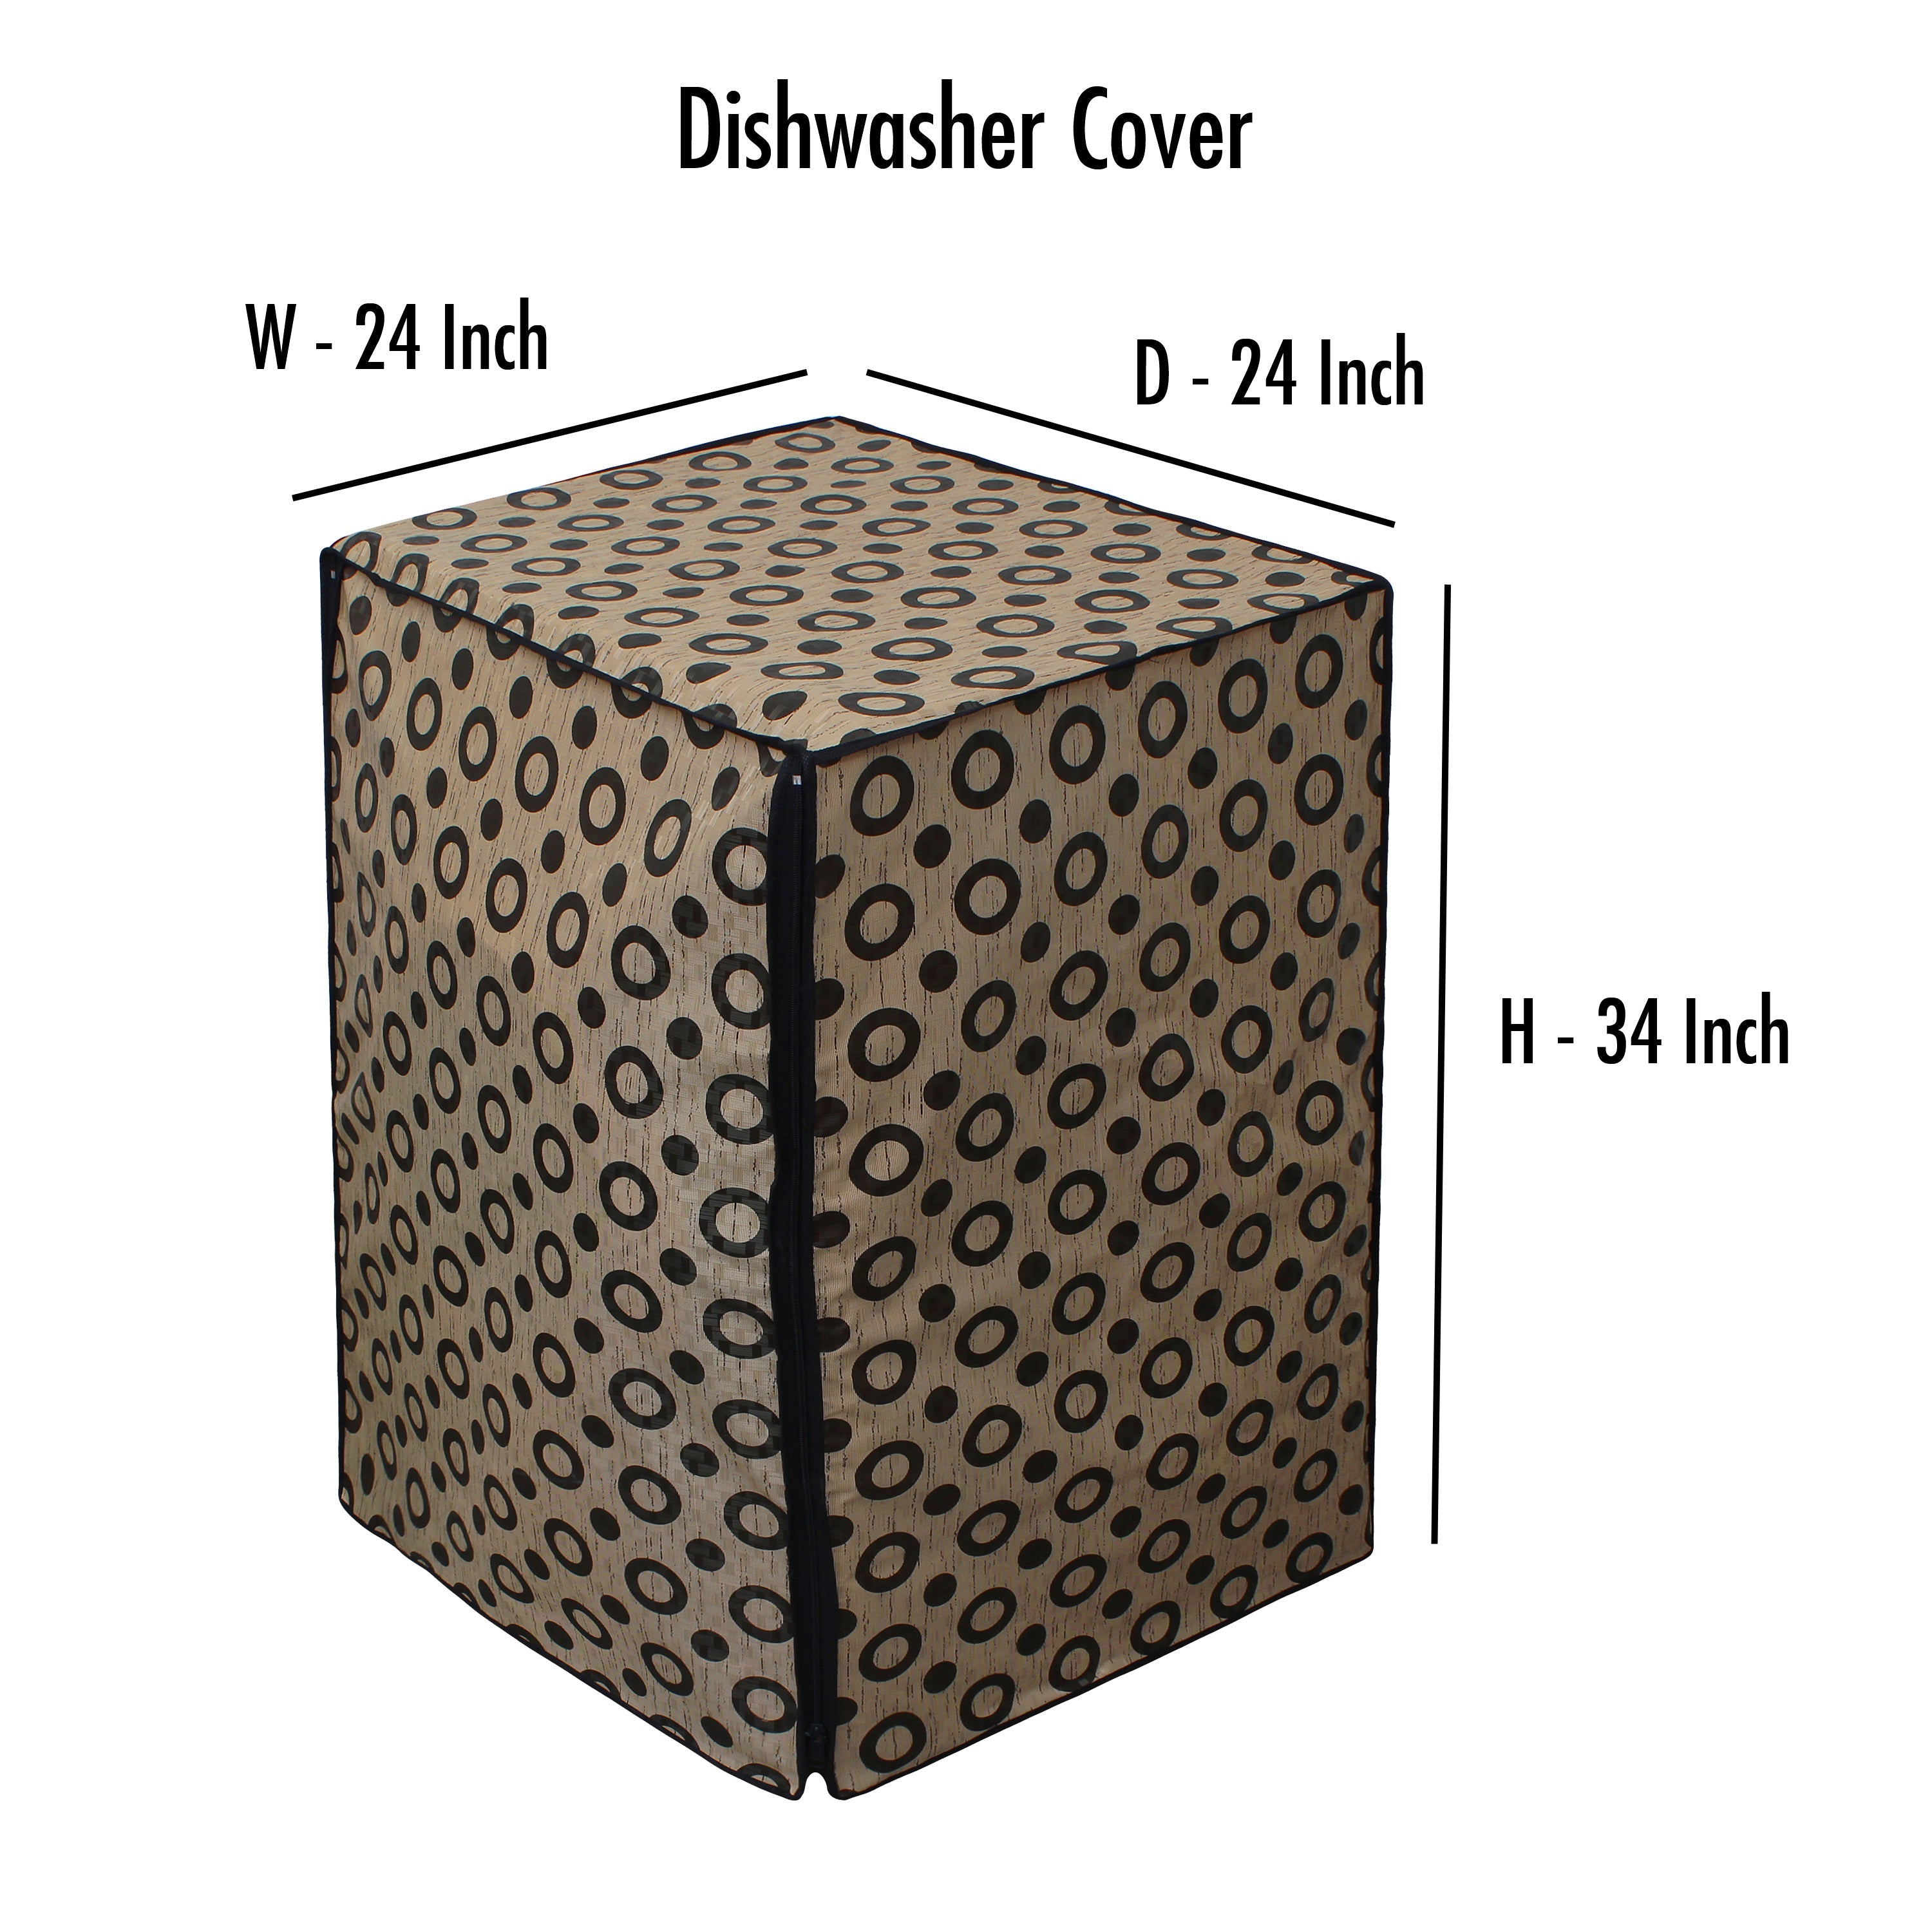 Waterproof and Dustproof Dishwasher Cover, SA02 - Dream Care Furnishings Private Limited